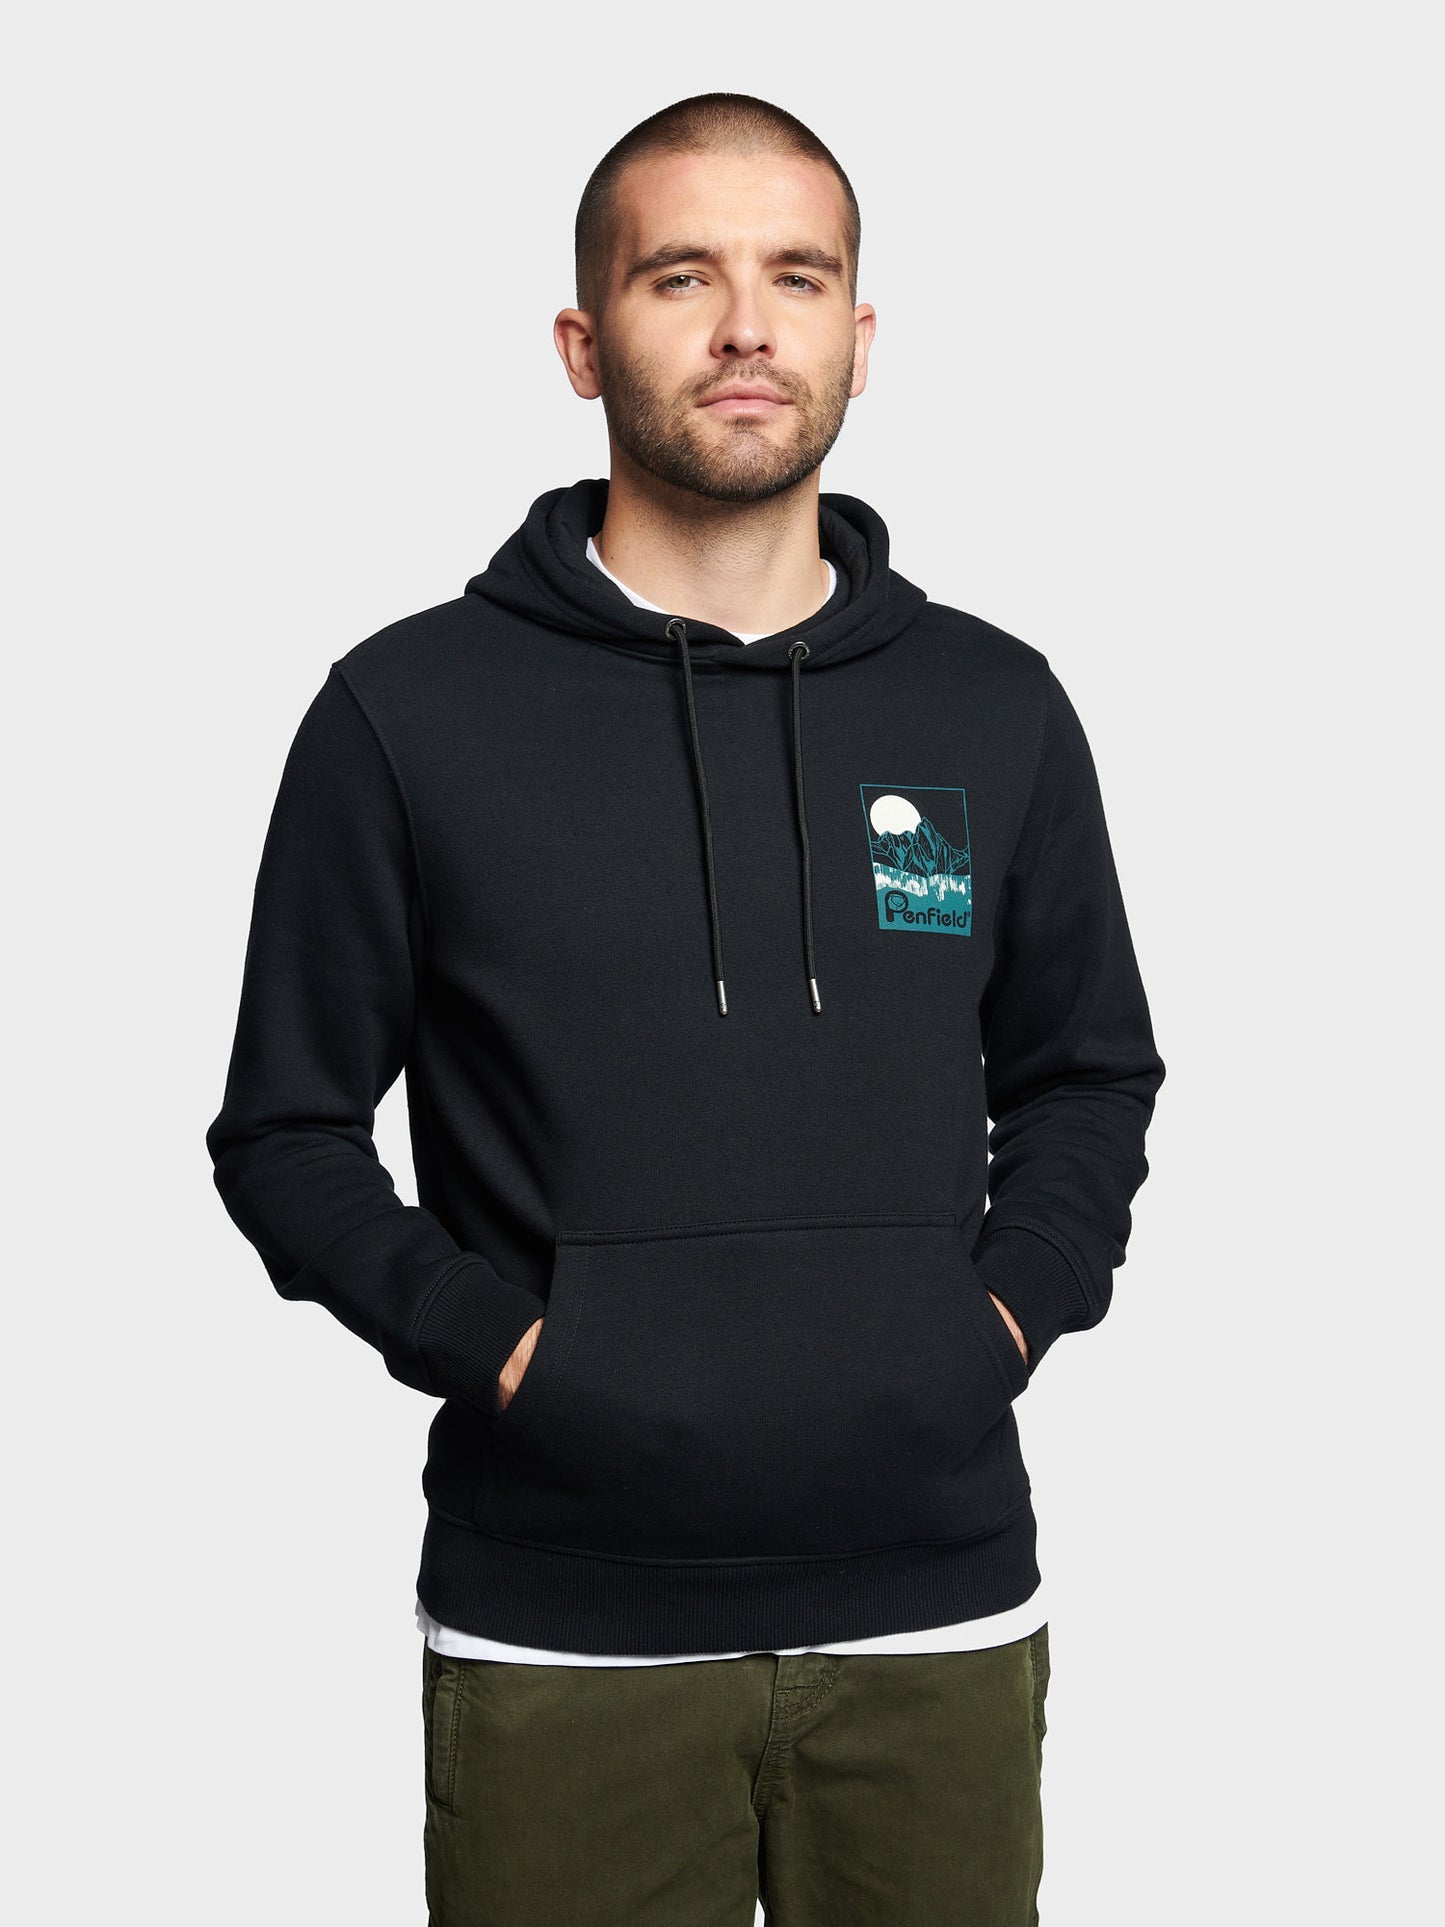 Washed Mountain Graphic Hoodie in Black